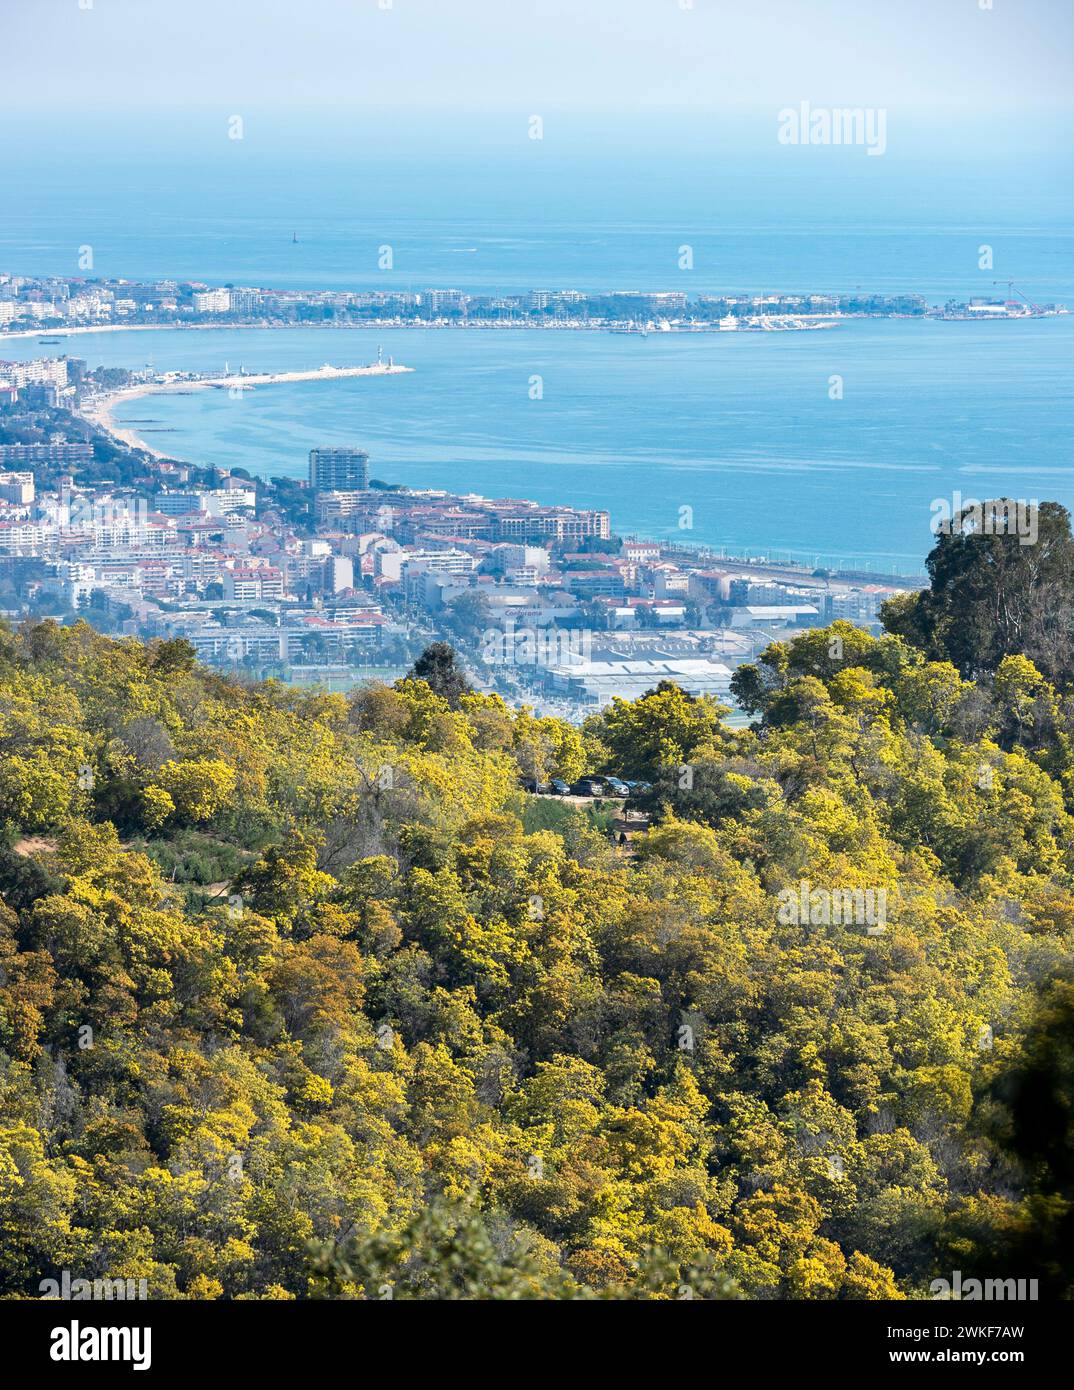 February 19th, Mandelieu, France. The Mimosa forest in the communal forest of Mandelieu, with the iconic cityscape of Cannes in the background. Travel Stock Photo